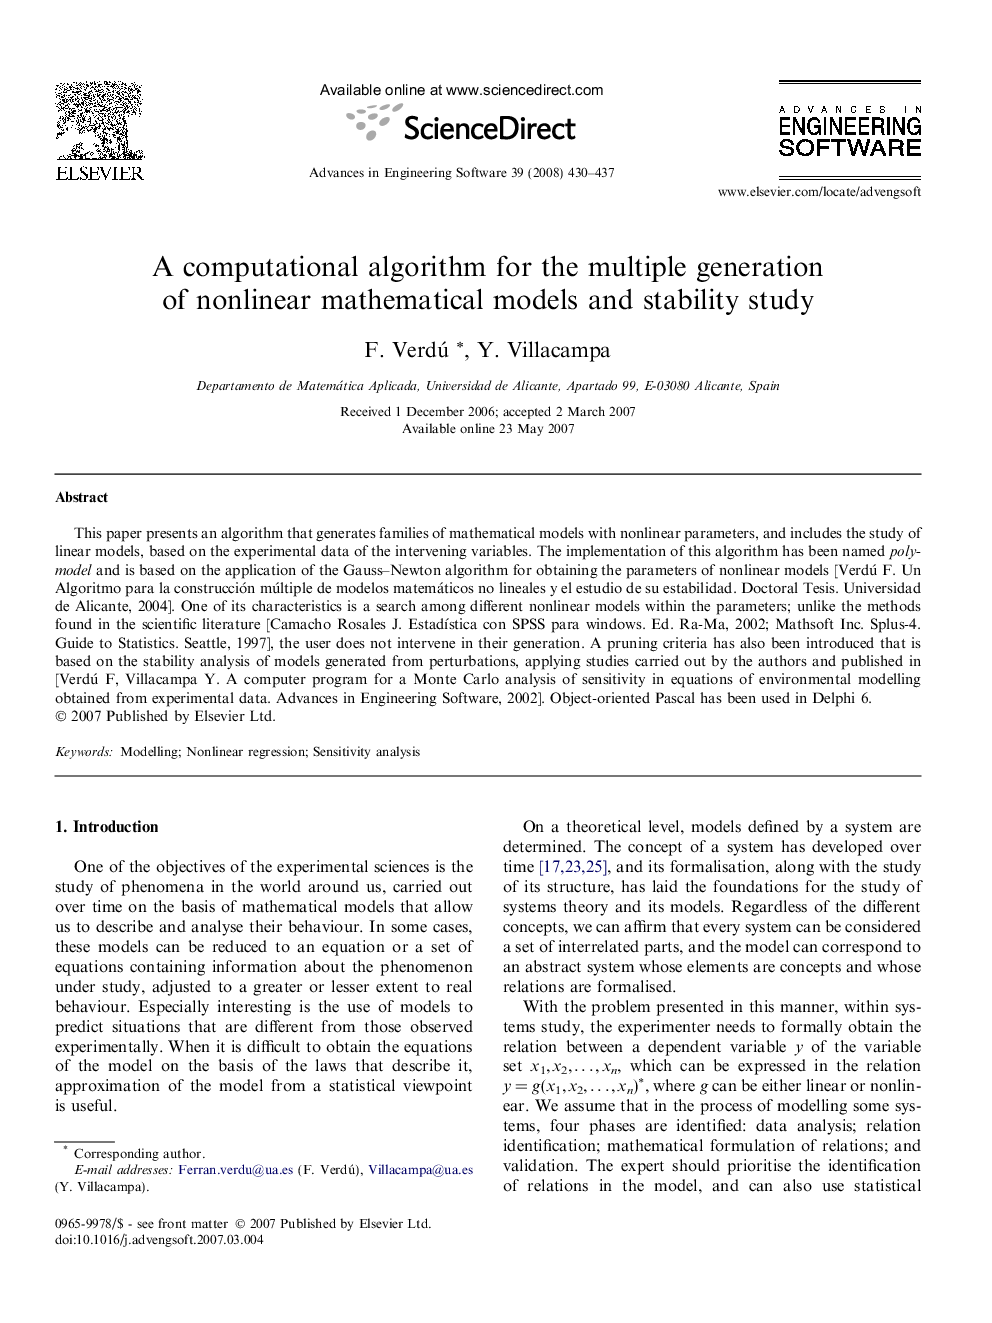 A computational algorithm for the multiple generation of nonlinear mathematical models and stability study